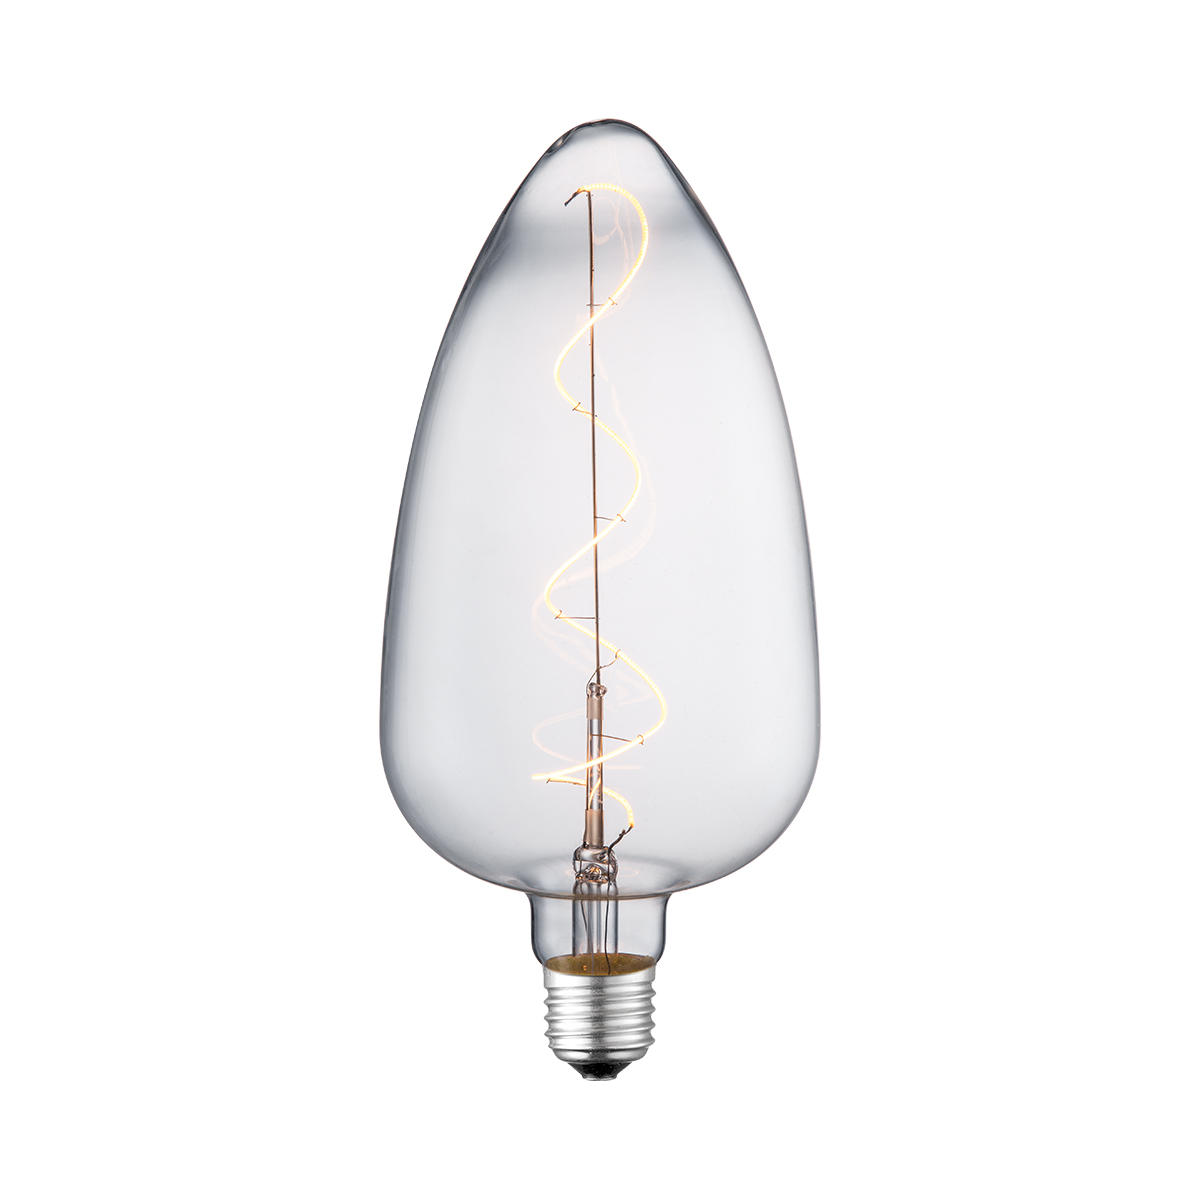 Tangla lighting - TLB-8116-04CL - LED Light Bulb Single Spiral filament - special 4W clear - leaf - dimmable - E27